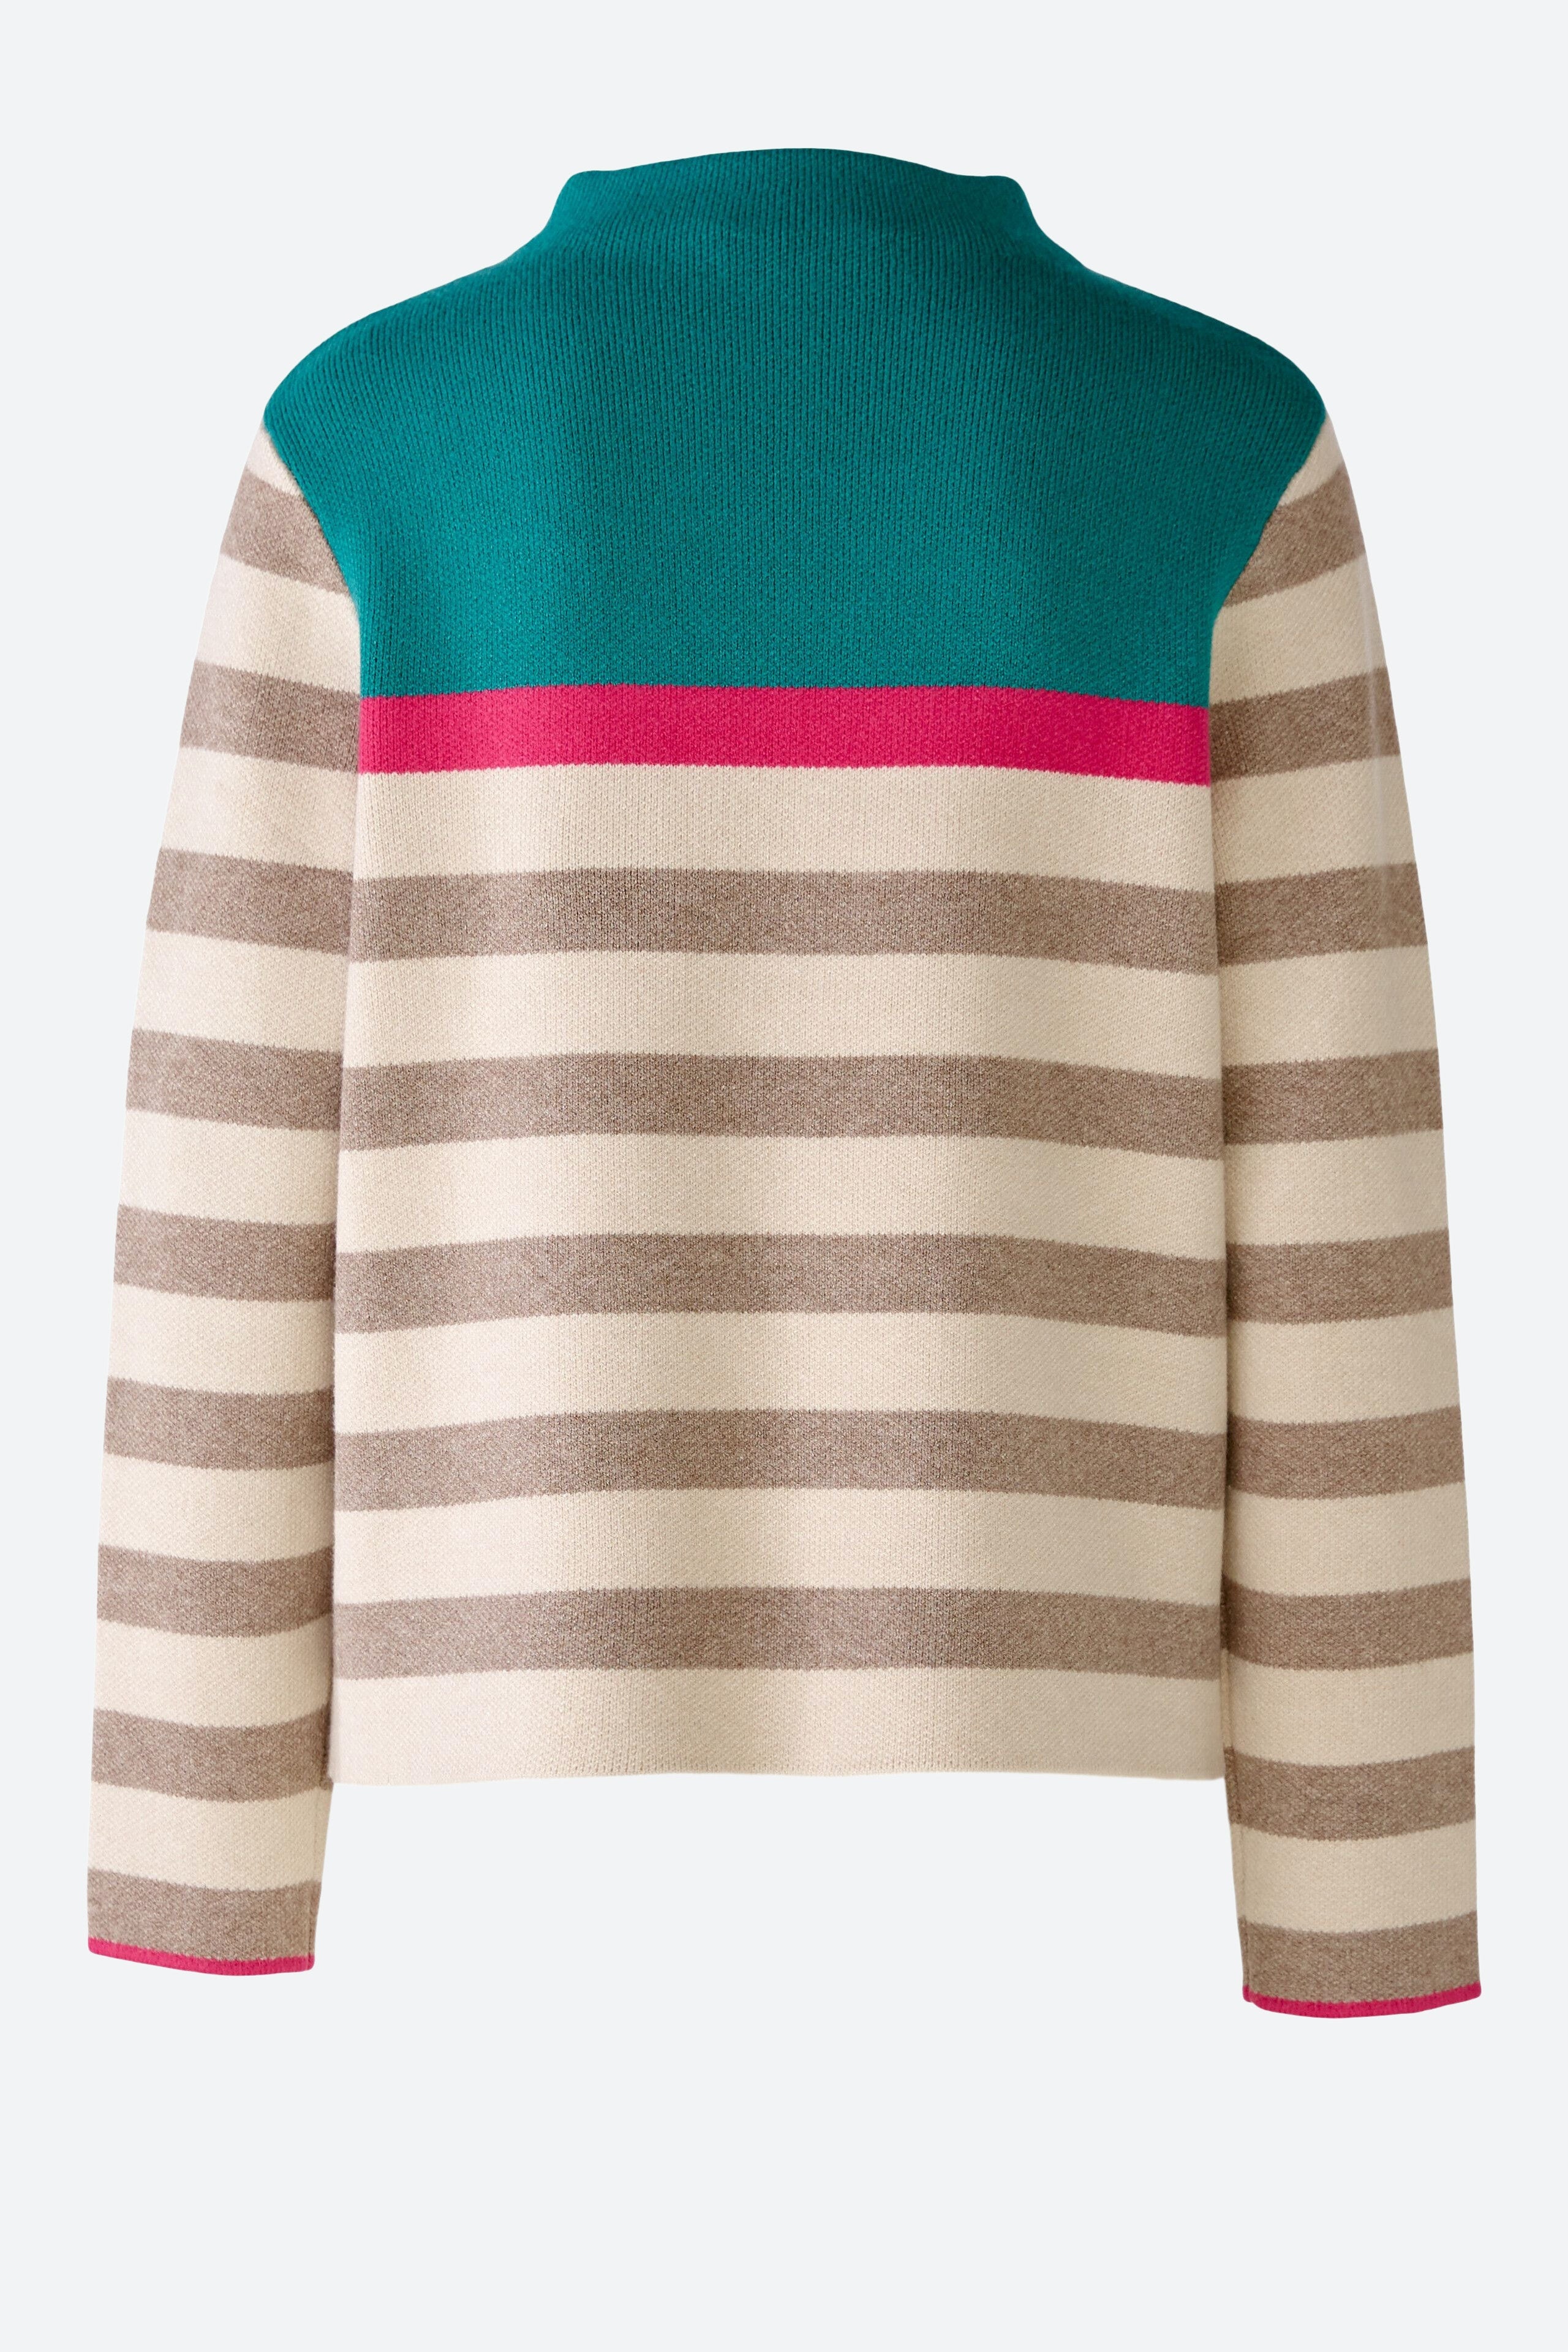 Multi-Color Knitted Sweater In Viscose Blend_07